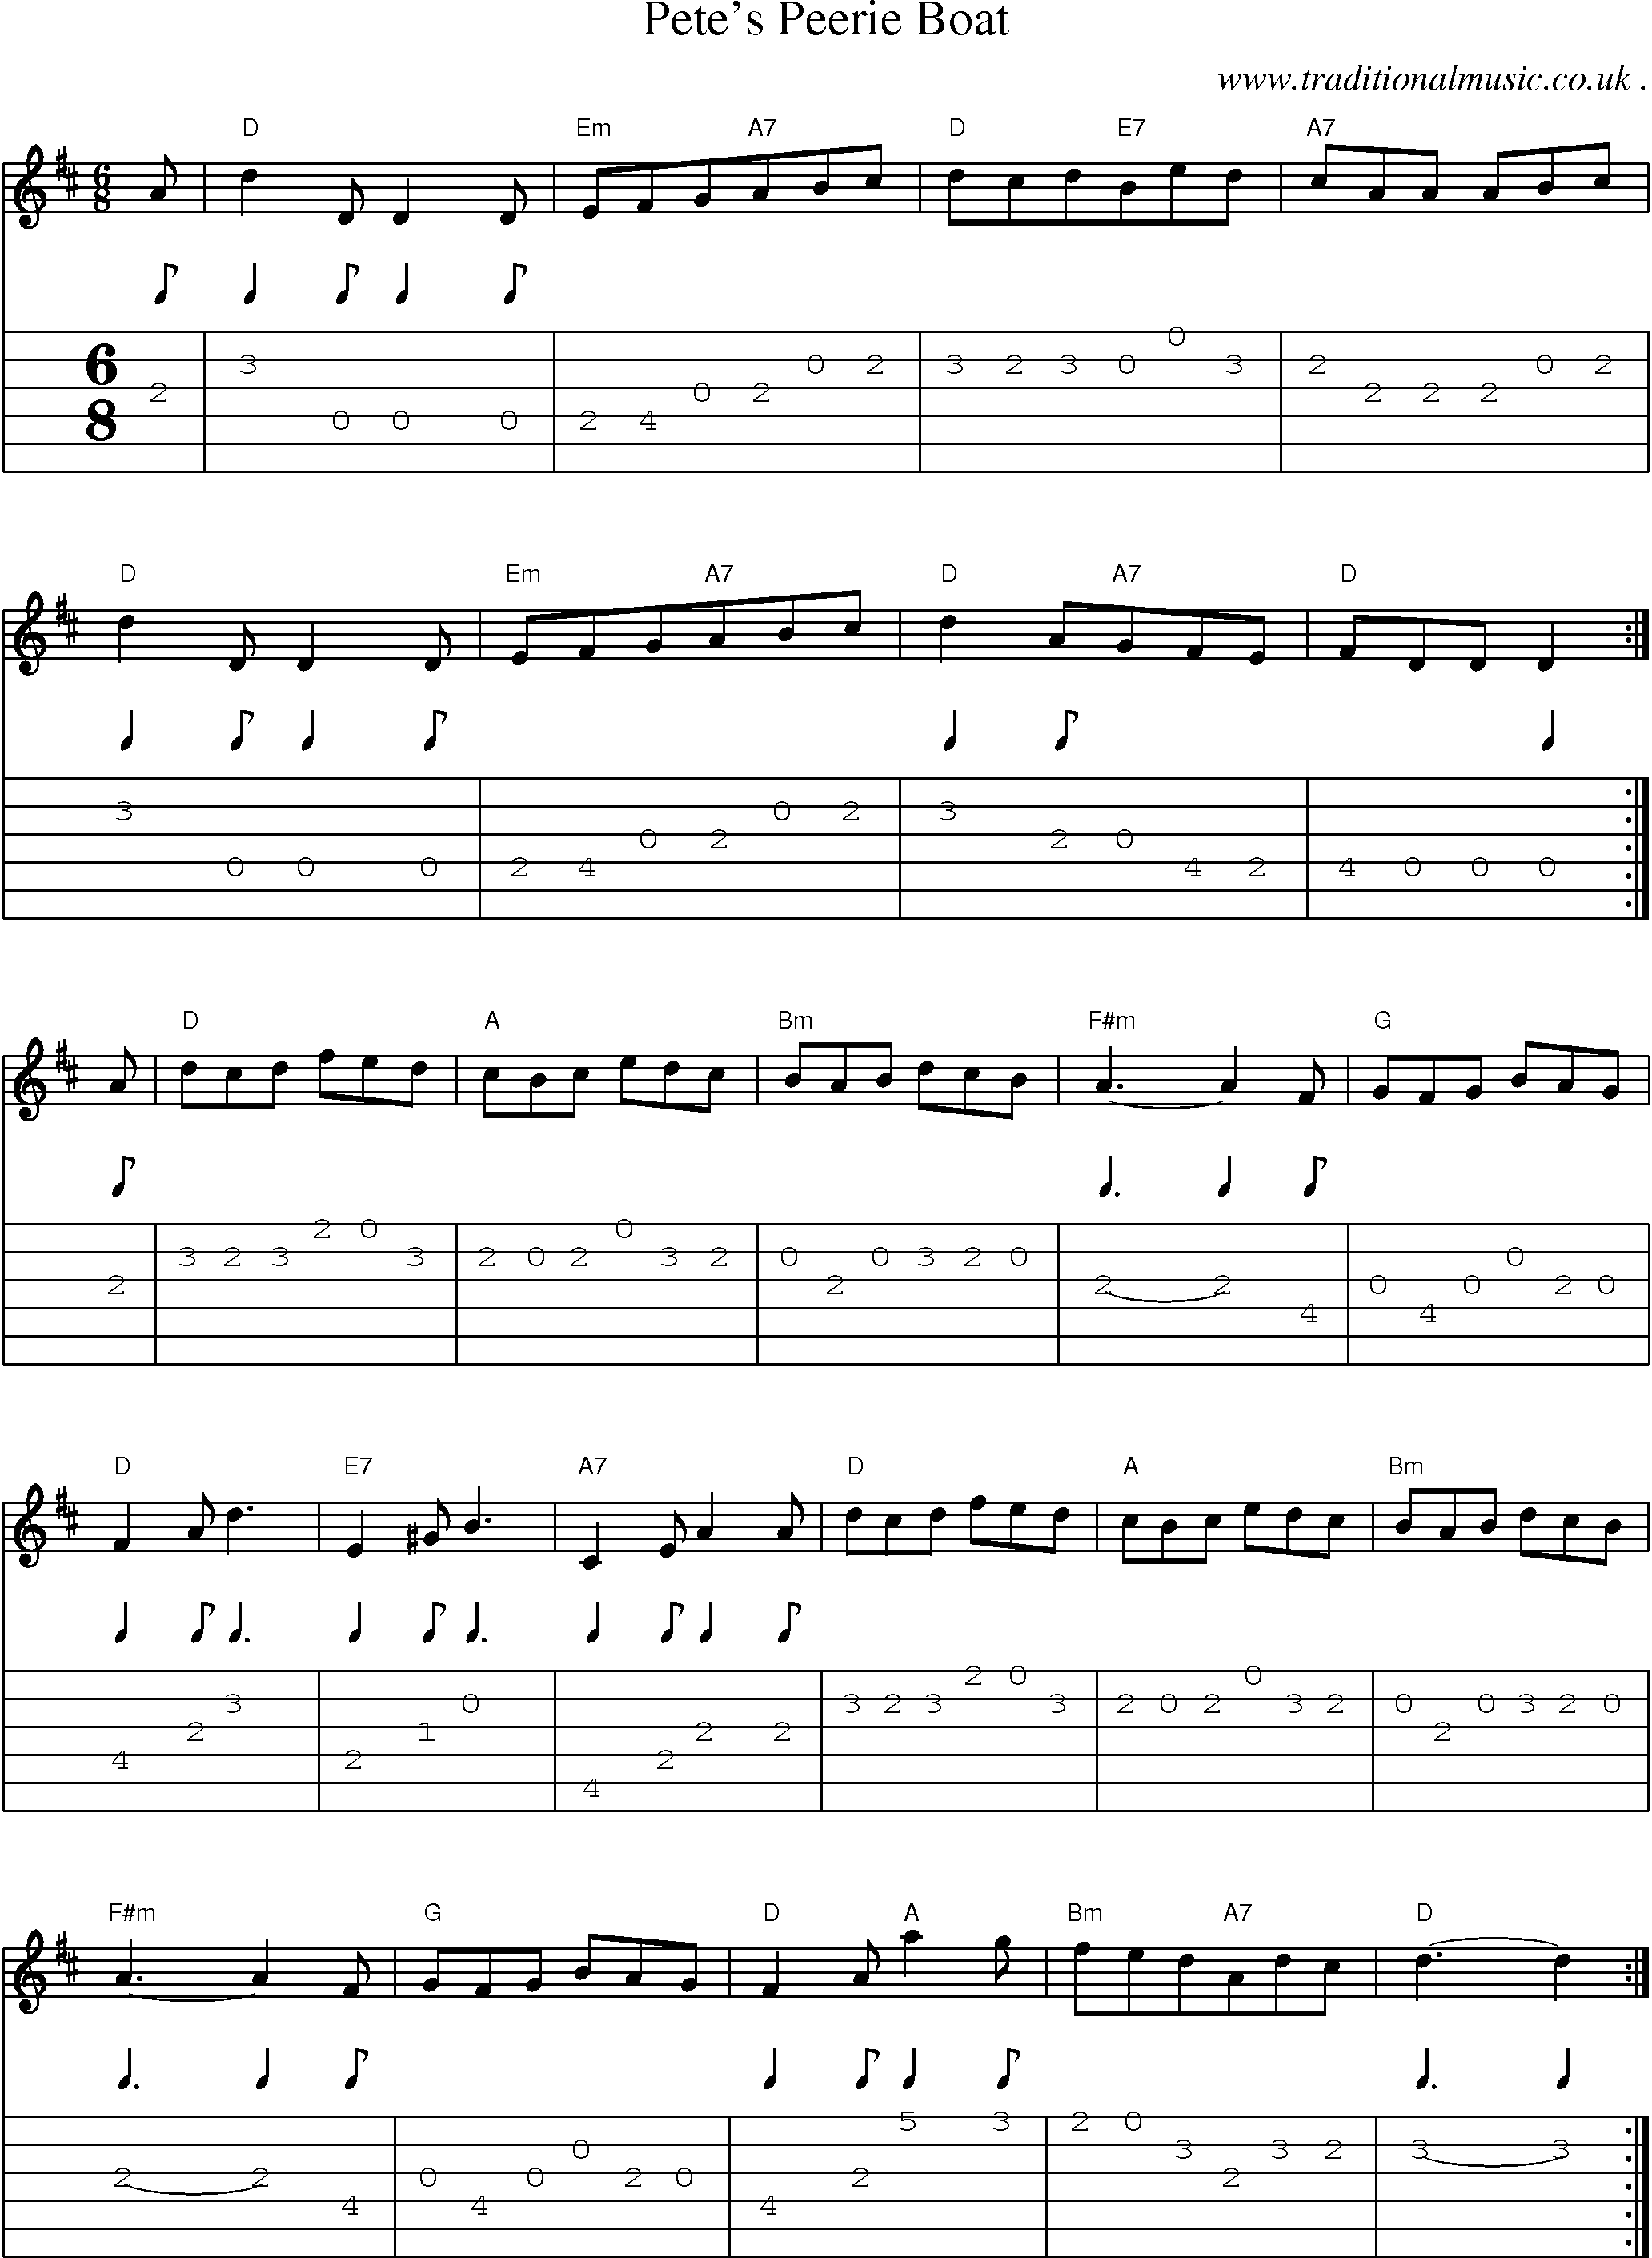 Sheet-Music and Guitar Tabs for Petes Peerie Boat